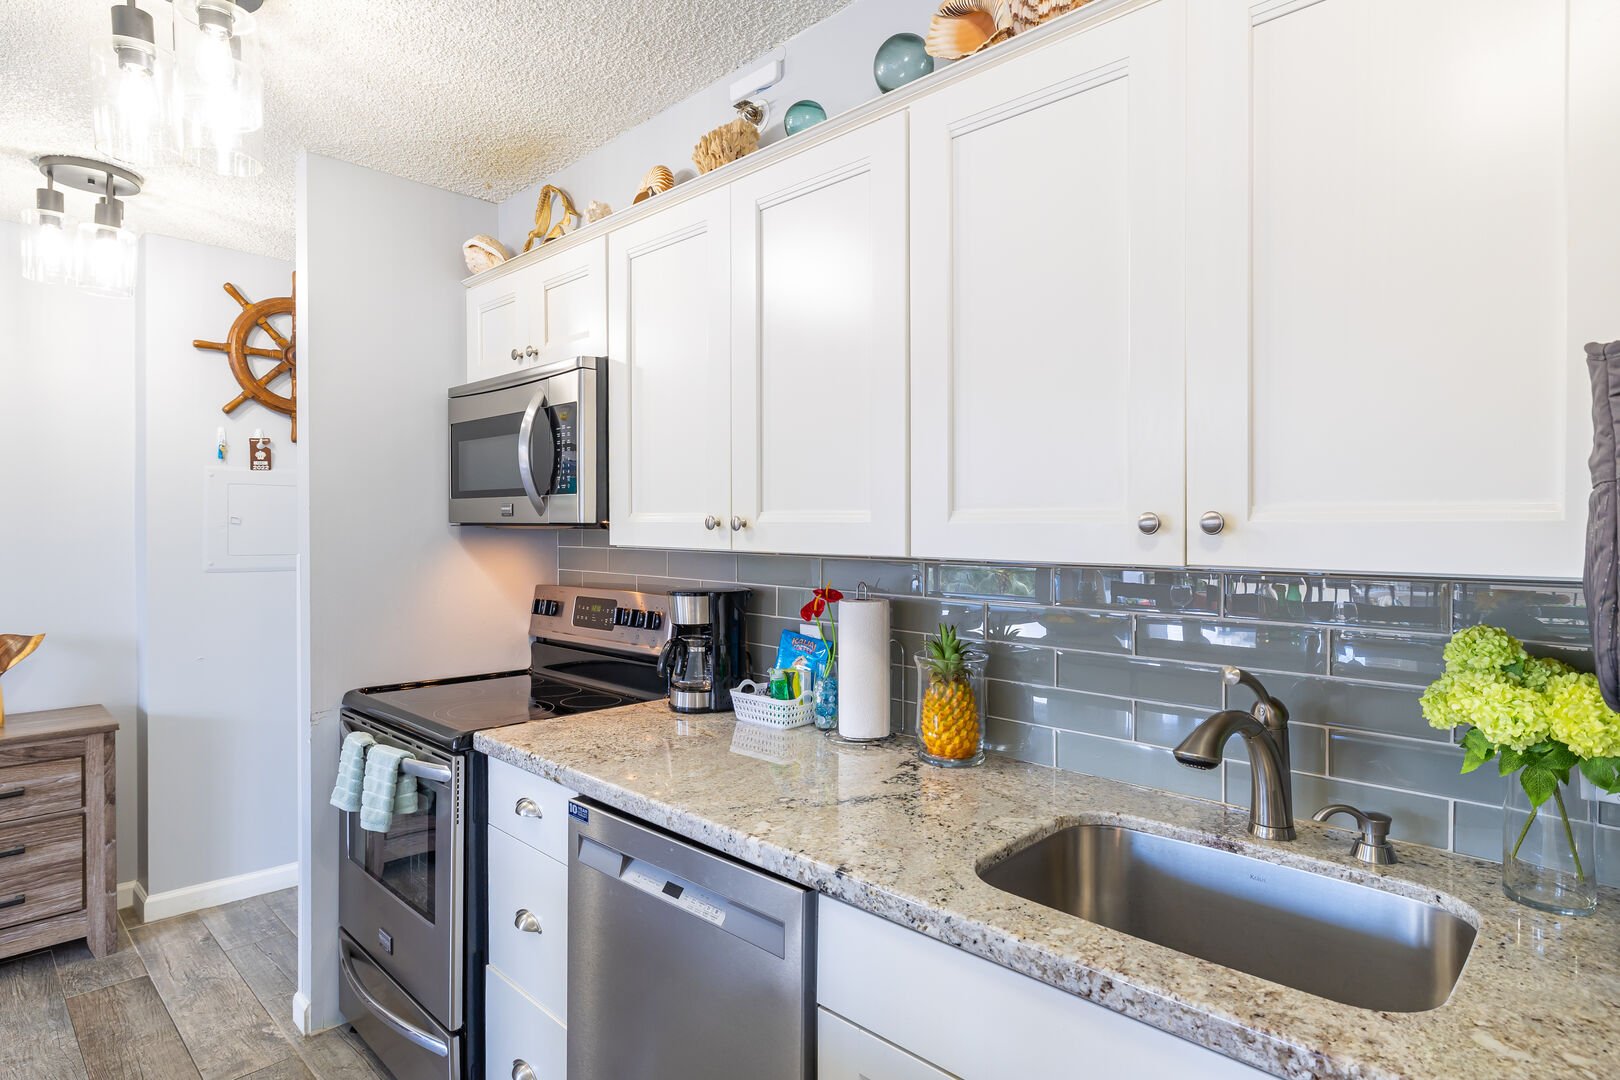 Renovated kitchen with all new appliances, including stove/oven, refrigerator, and dishwasher